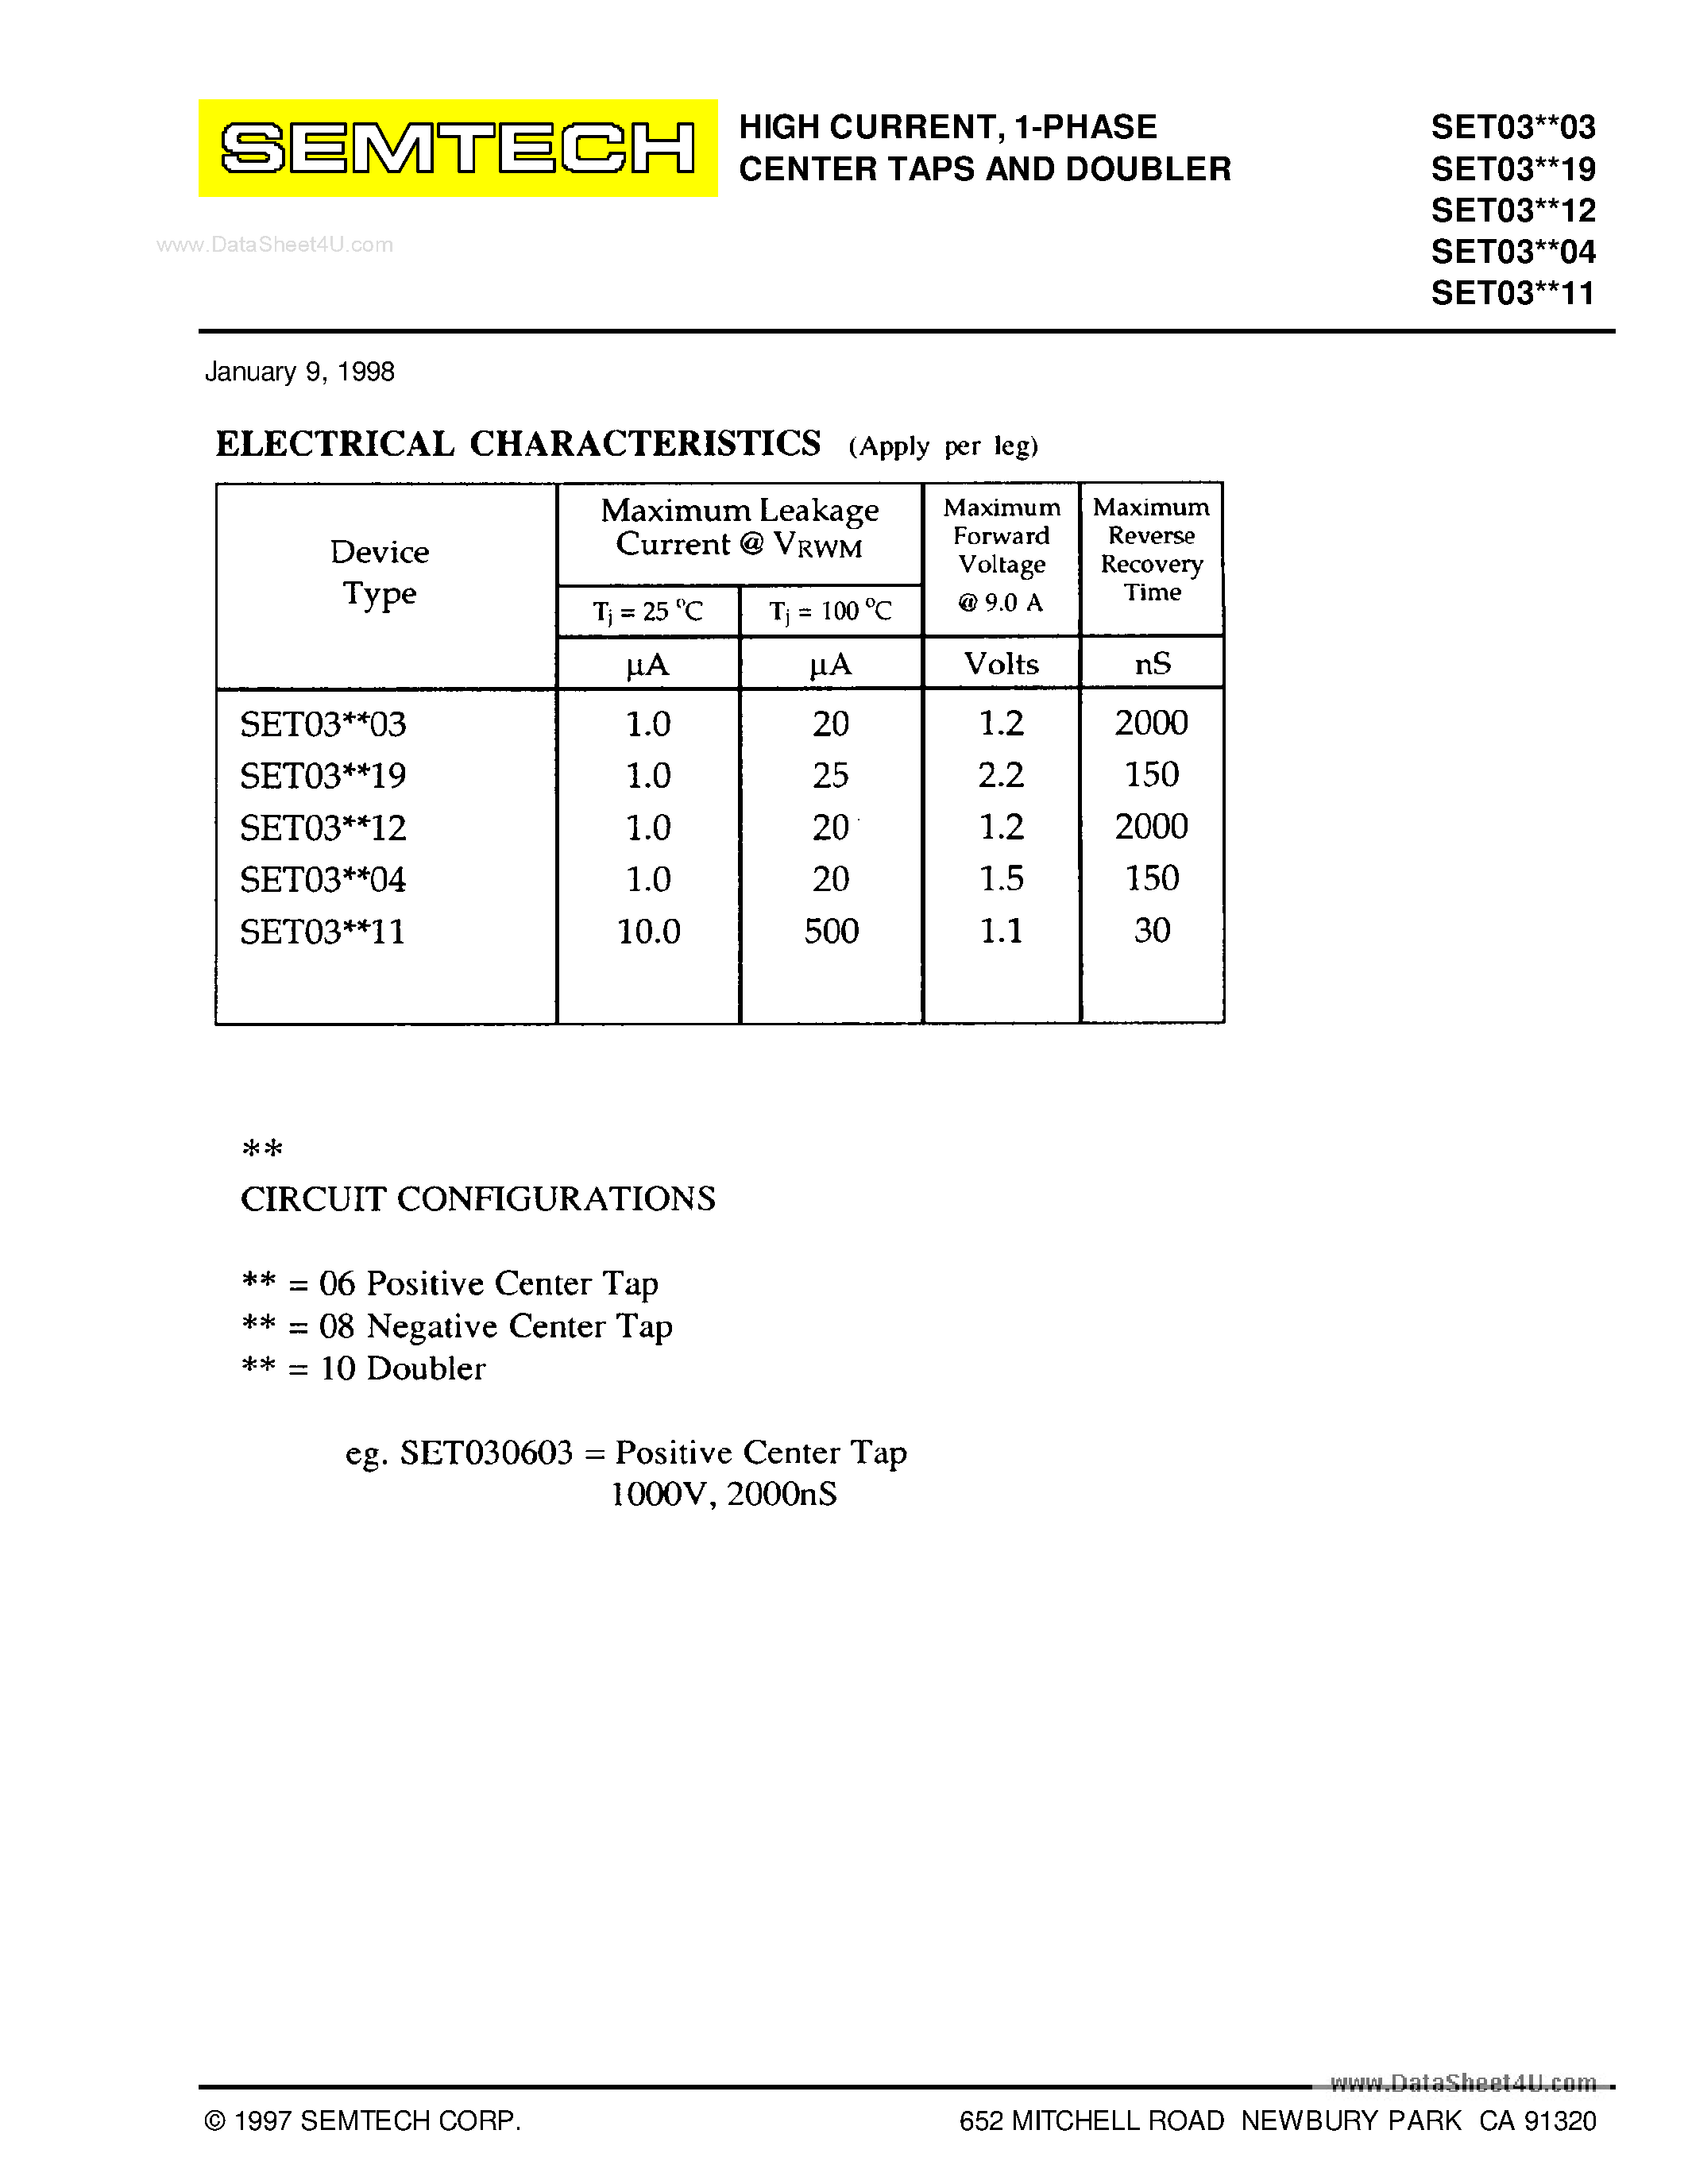 Datasheet SET030603 - (SET03xxxx) DO4 STUD HIGH CURRENT ISOLATED RECTIFIER ASSEMBLY page 2